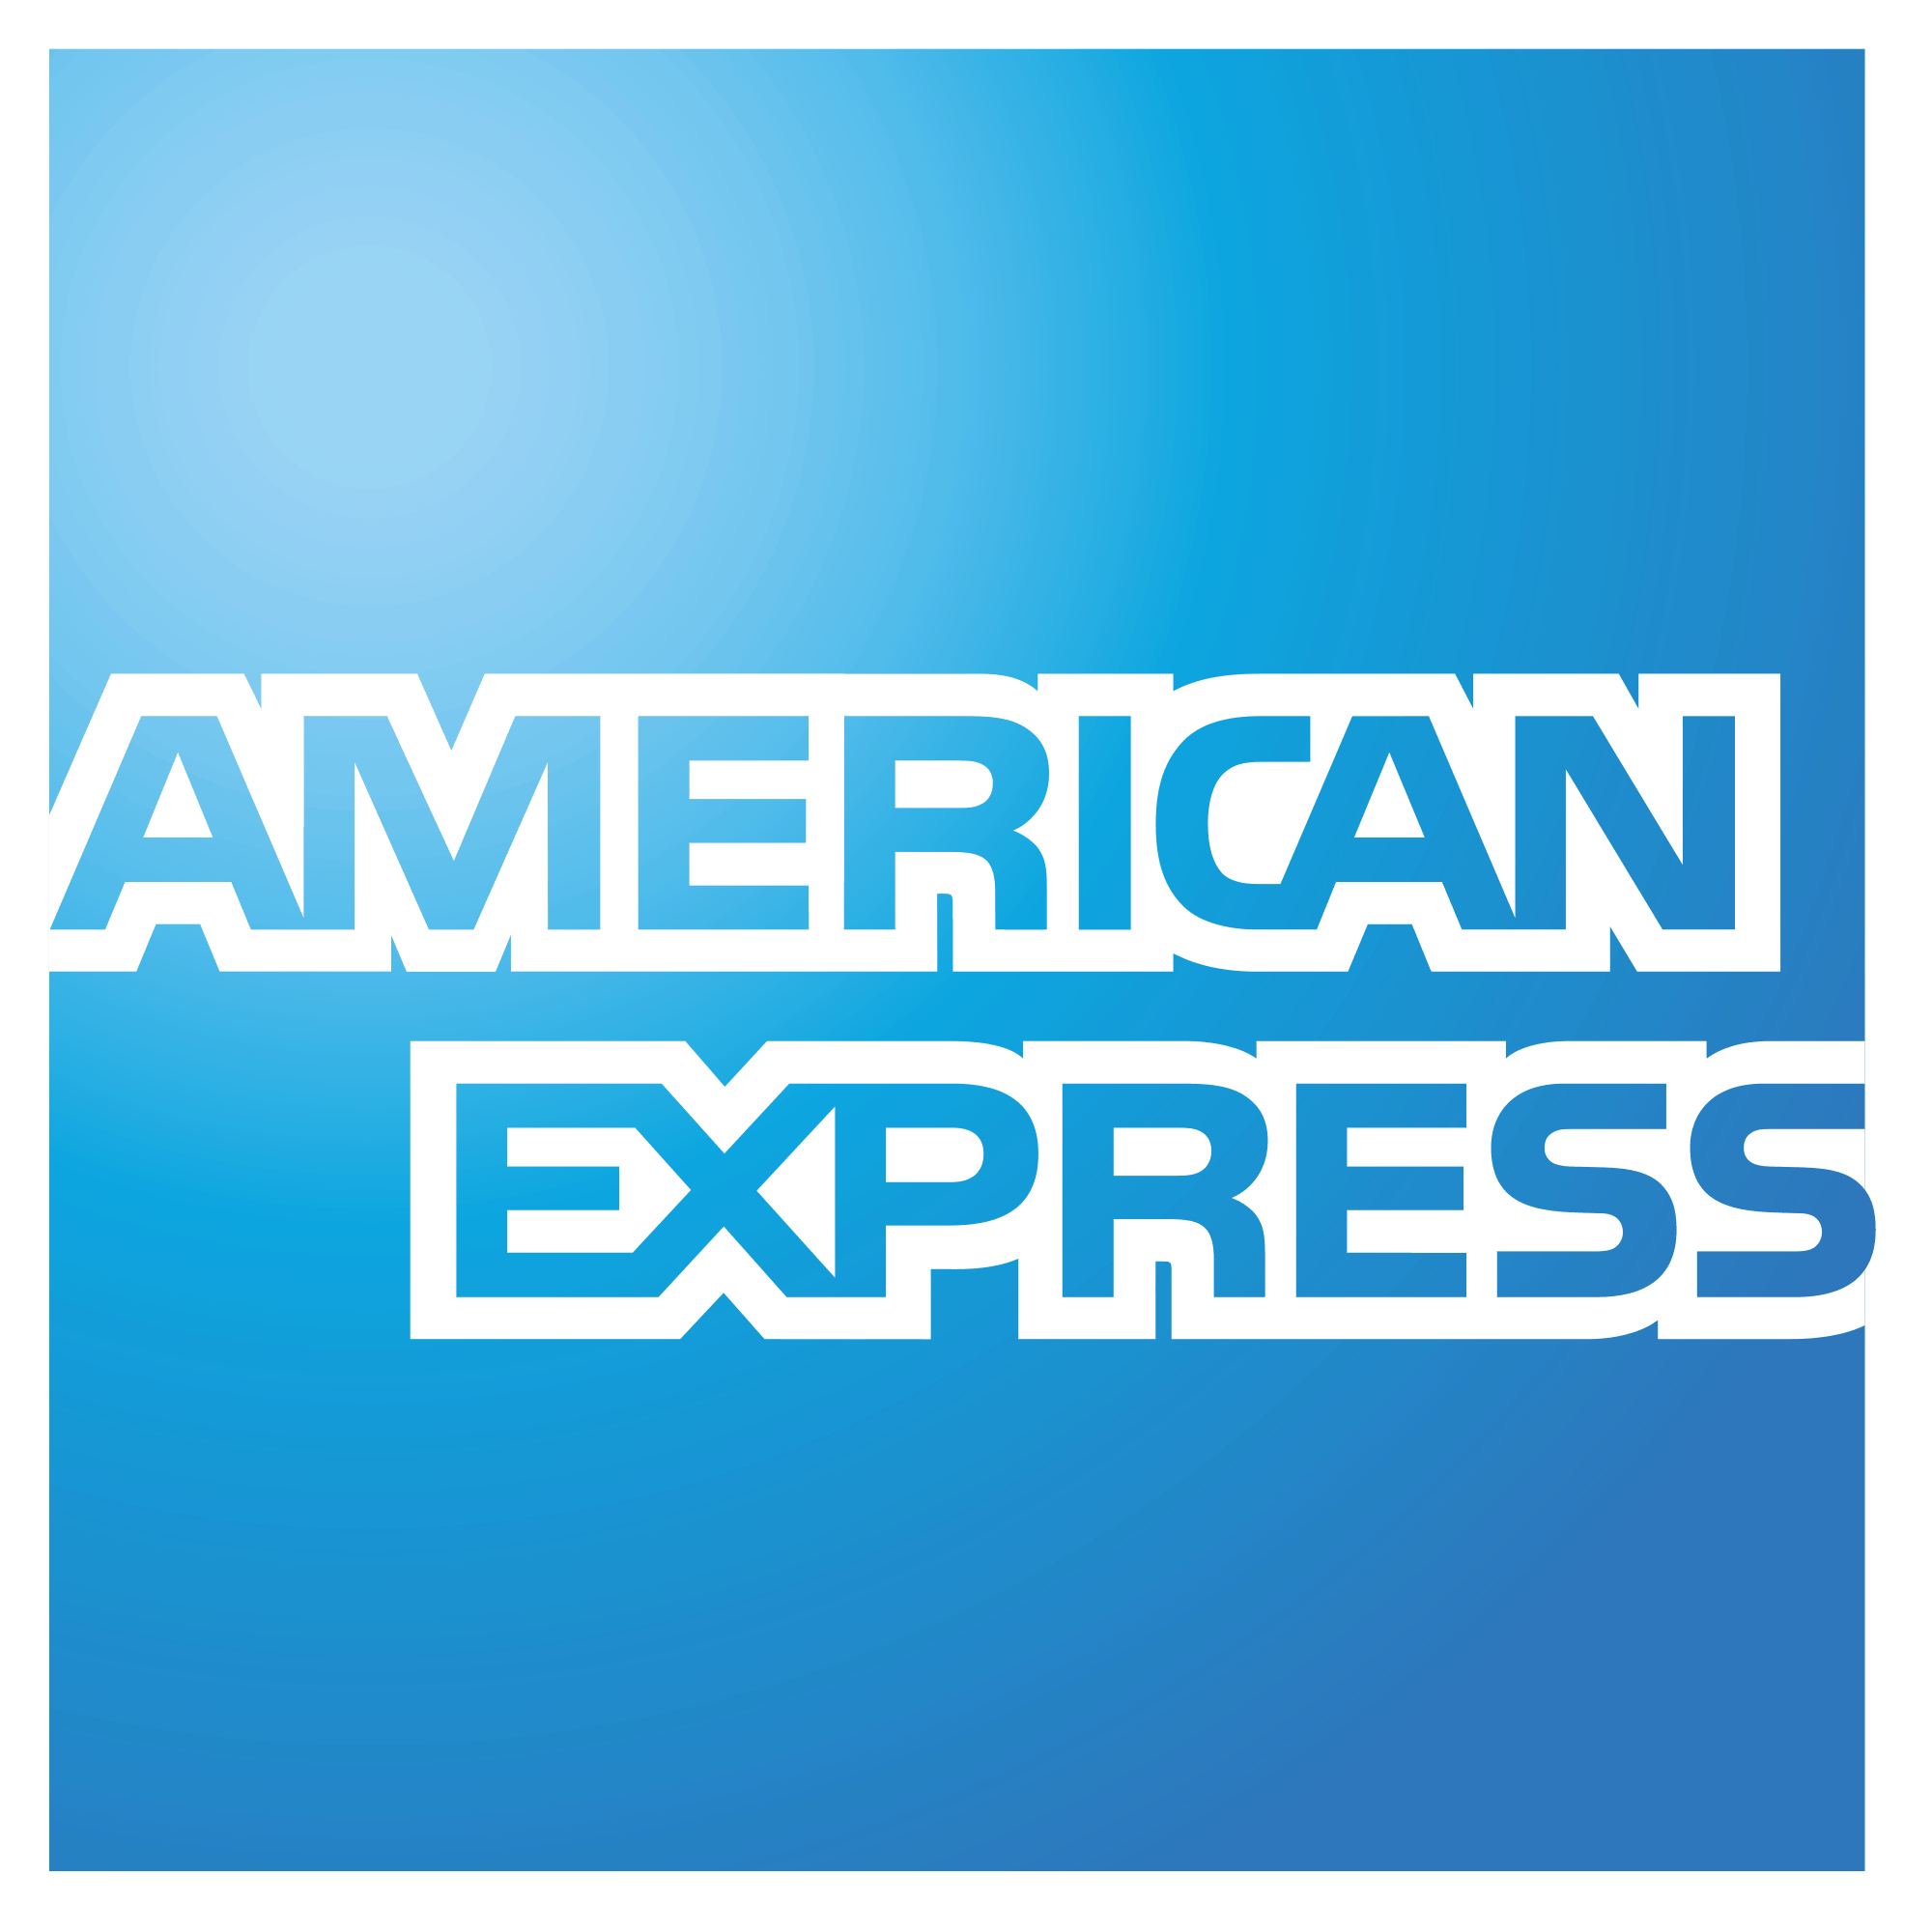 The American Express logo on a blue background, providing branding services for CEO.